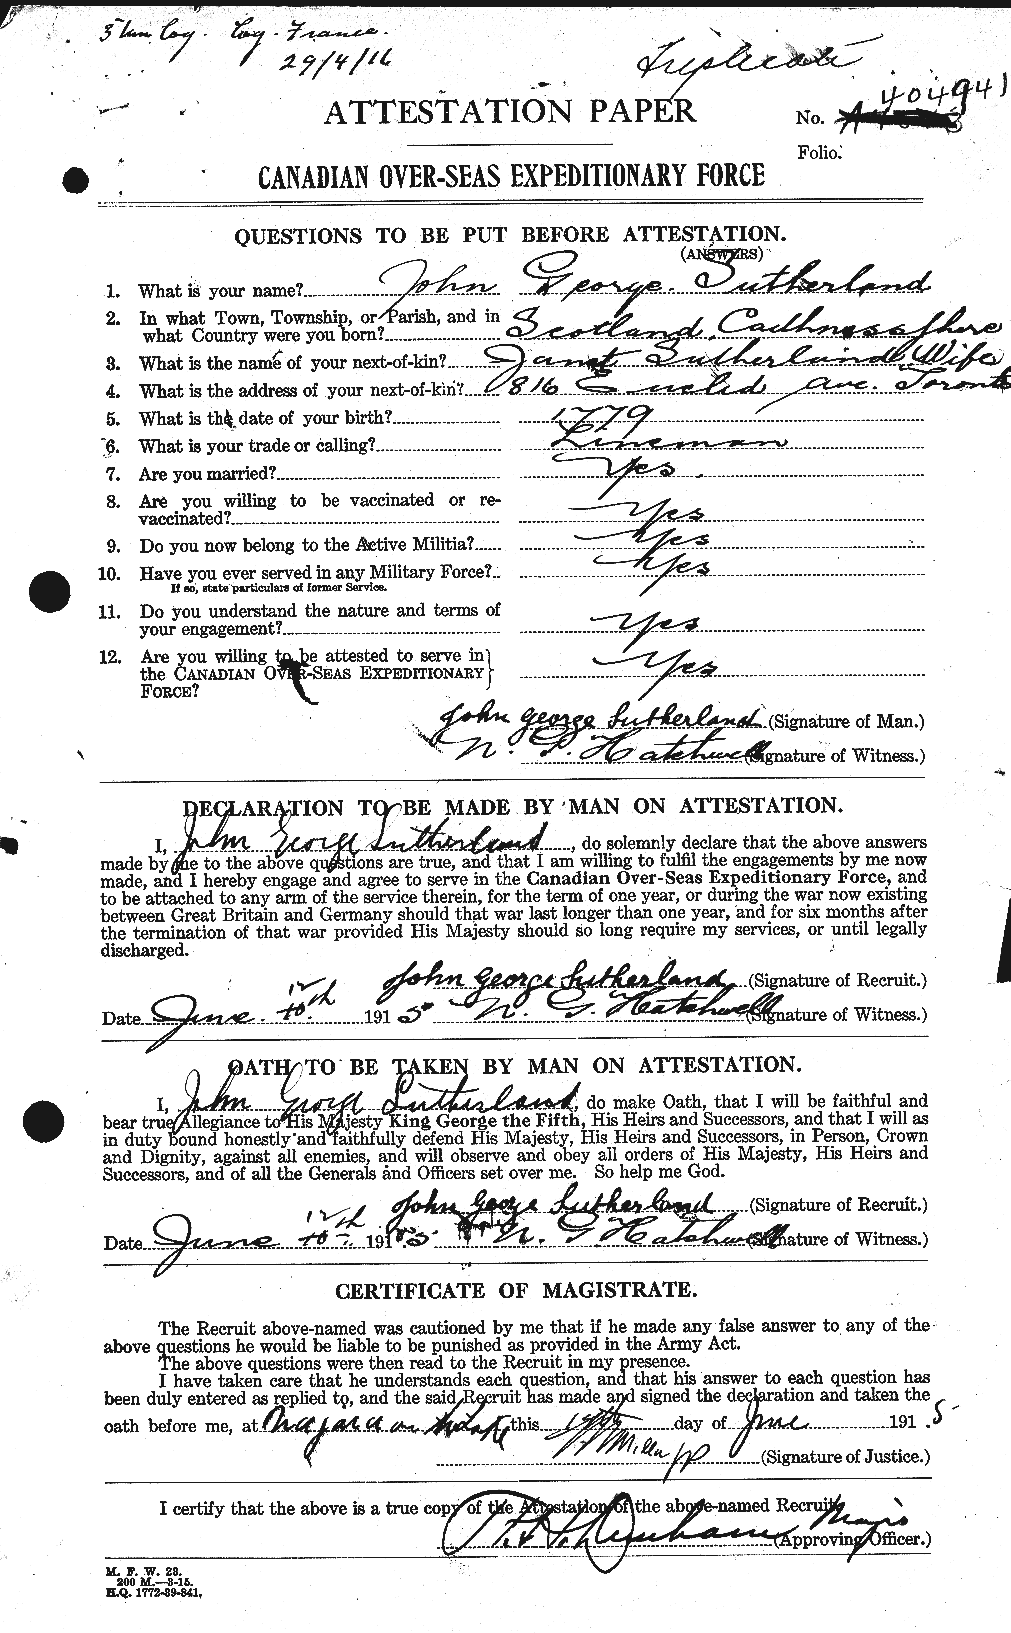 Personnel Records of the First World War - CEF 124691a